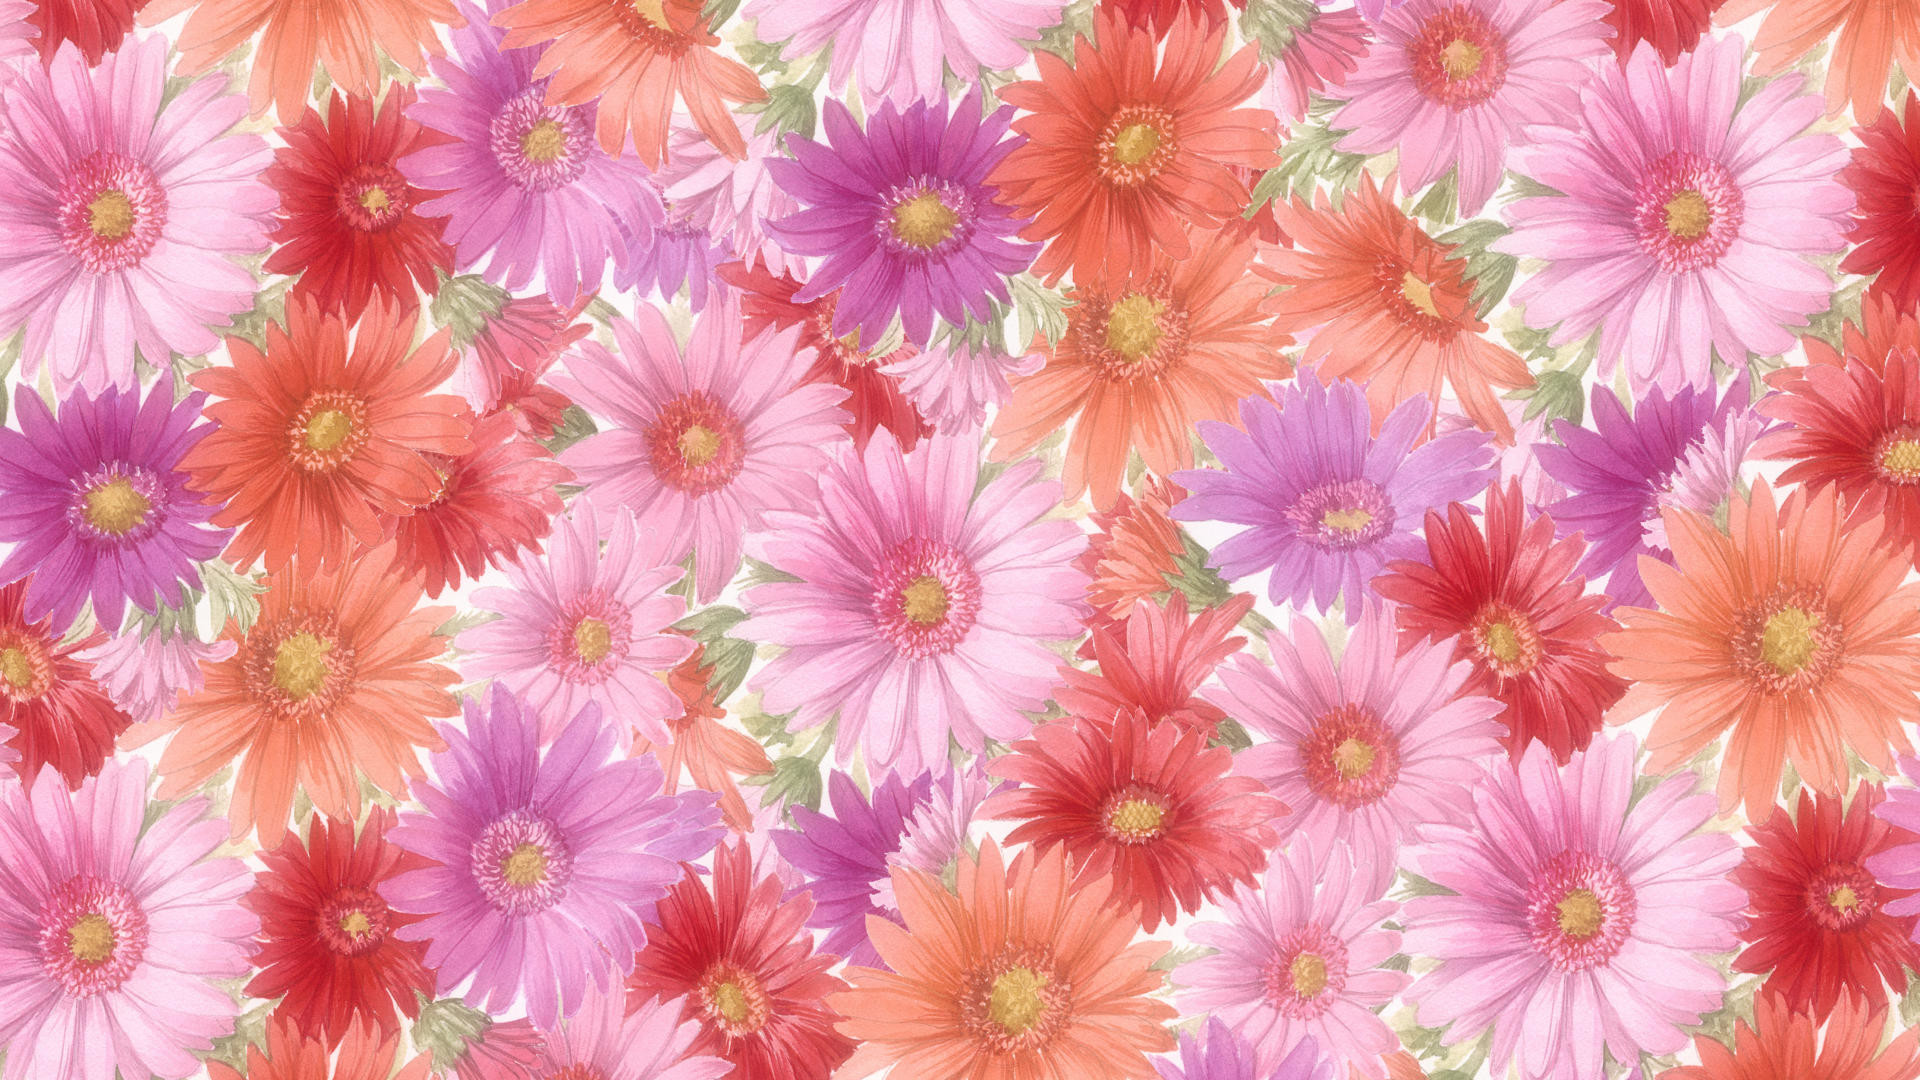 16000+ Flowers HD Wallpapers and Backgrounds